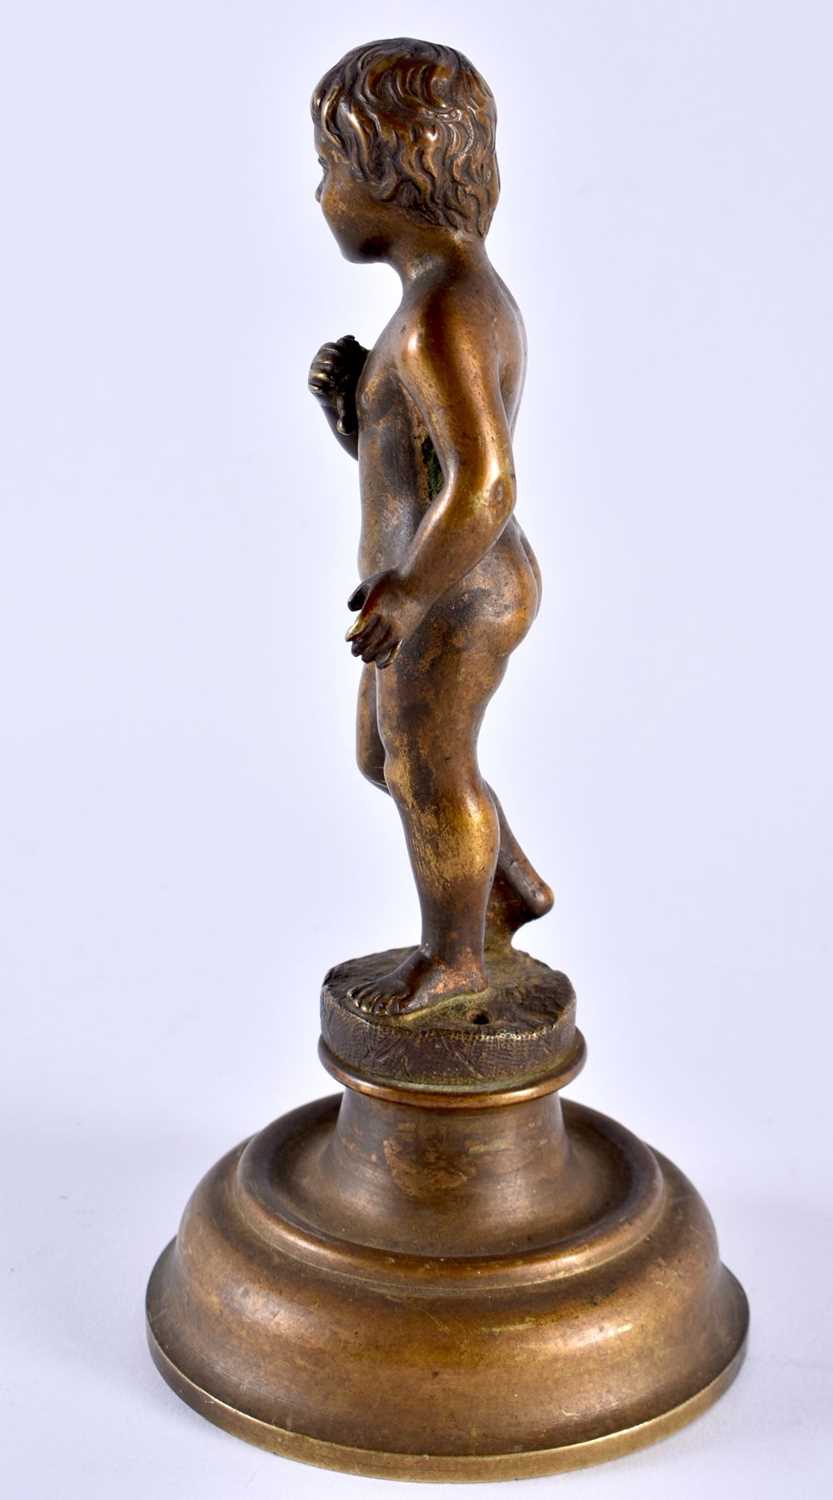 AN EARLY 20TH CENTURY EUROPEAN BRONZE FIGURE OF NUDE modelled upon a circular base. 17 cm high. - Image 3 of 5